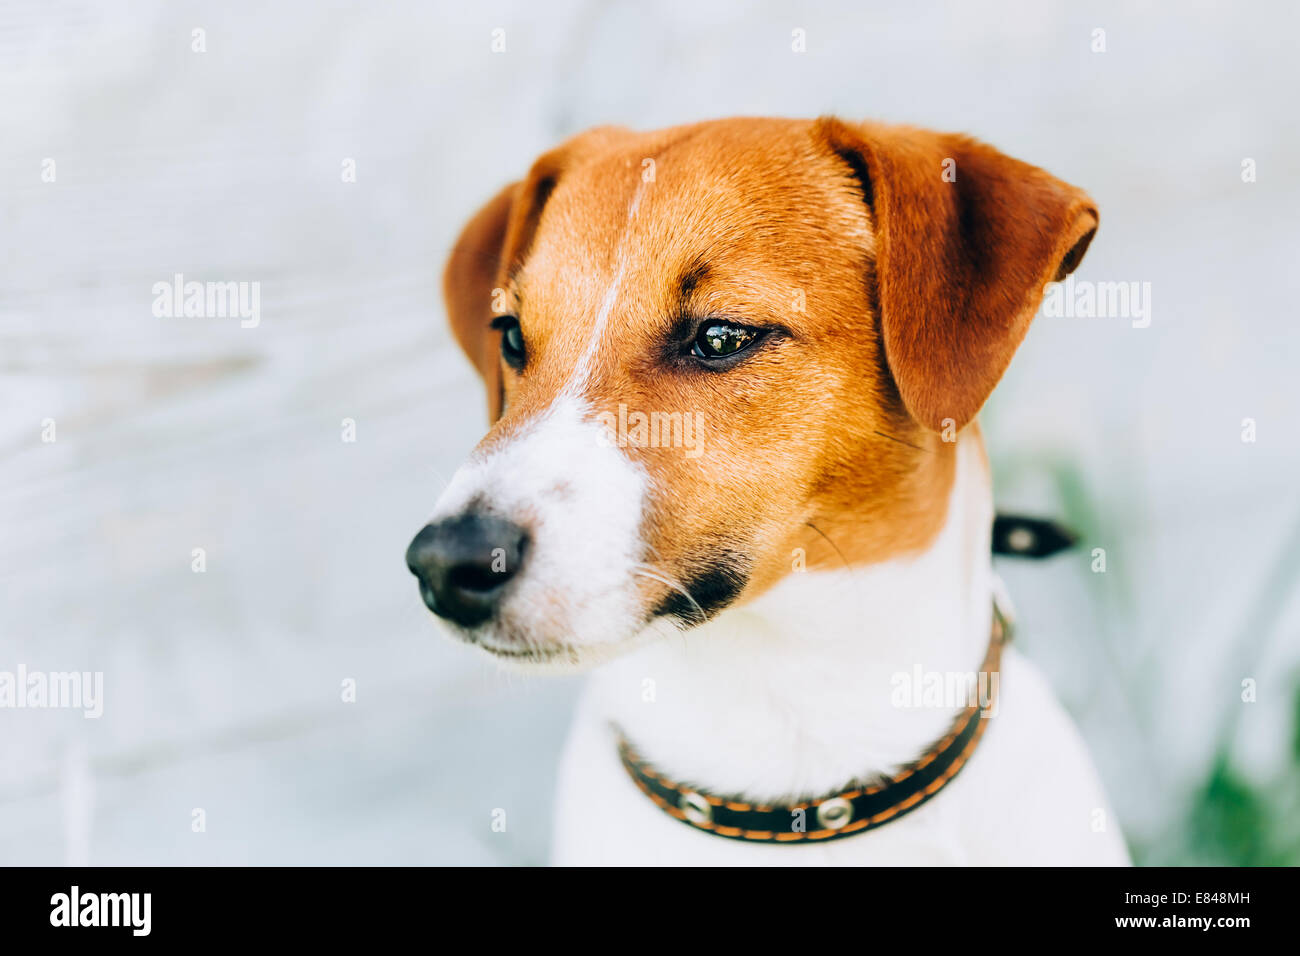 White And Brown Dog Jack Russell Terrier On Light Wooden Background Outdoors. Toned Instant Photo Stock Photo